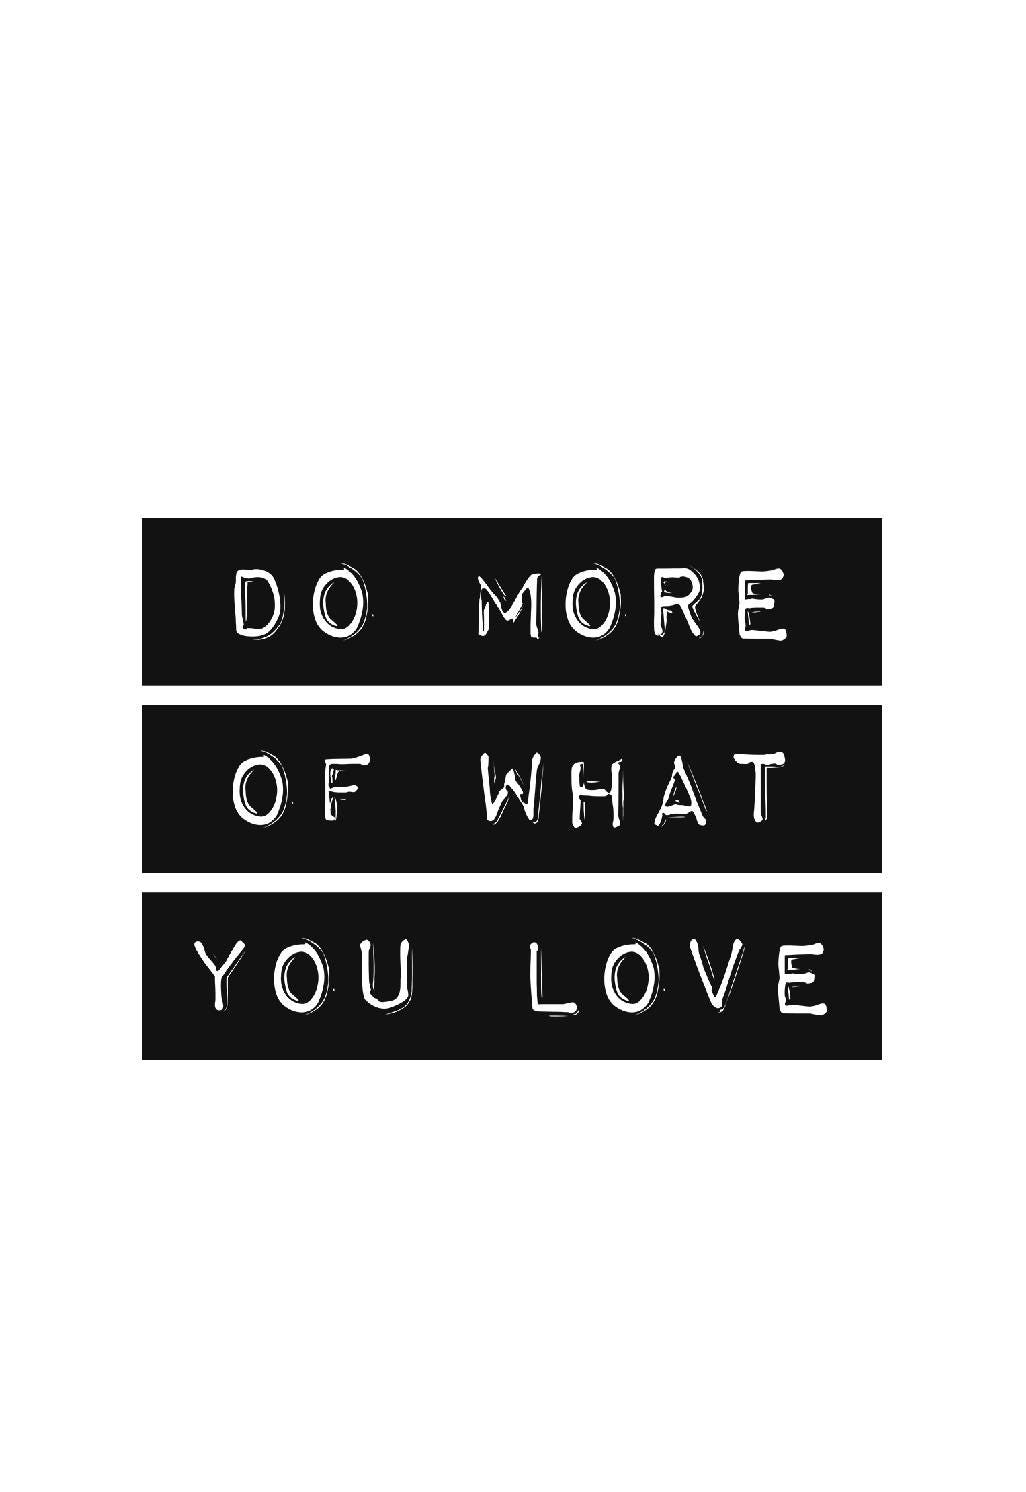 Do More of What You Love